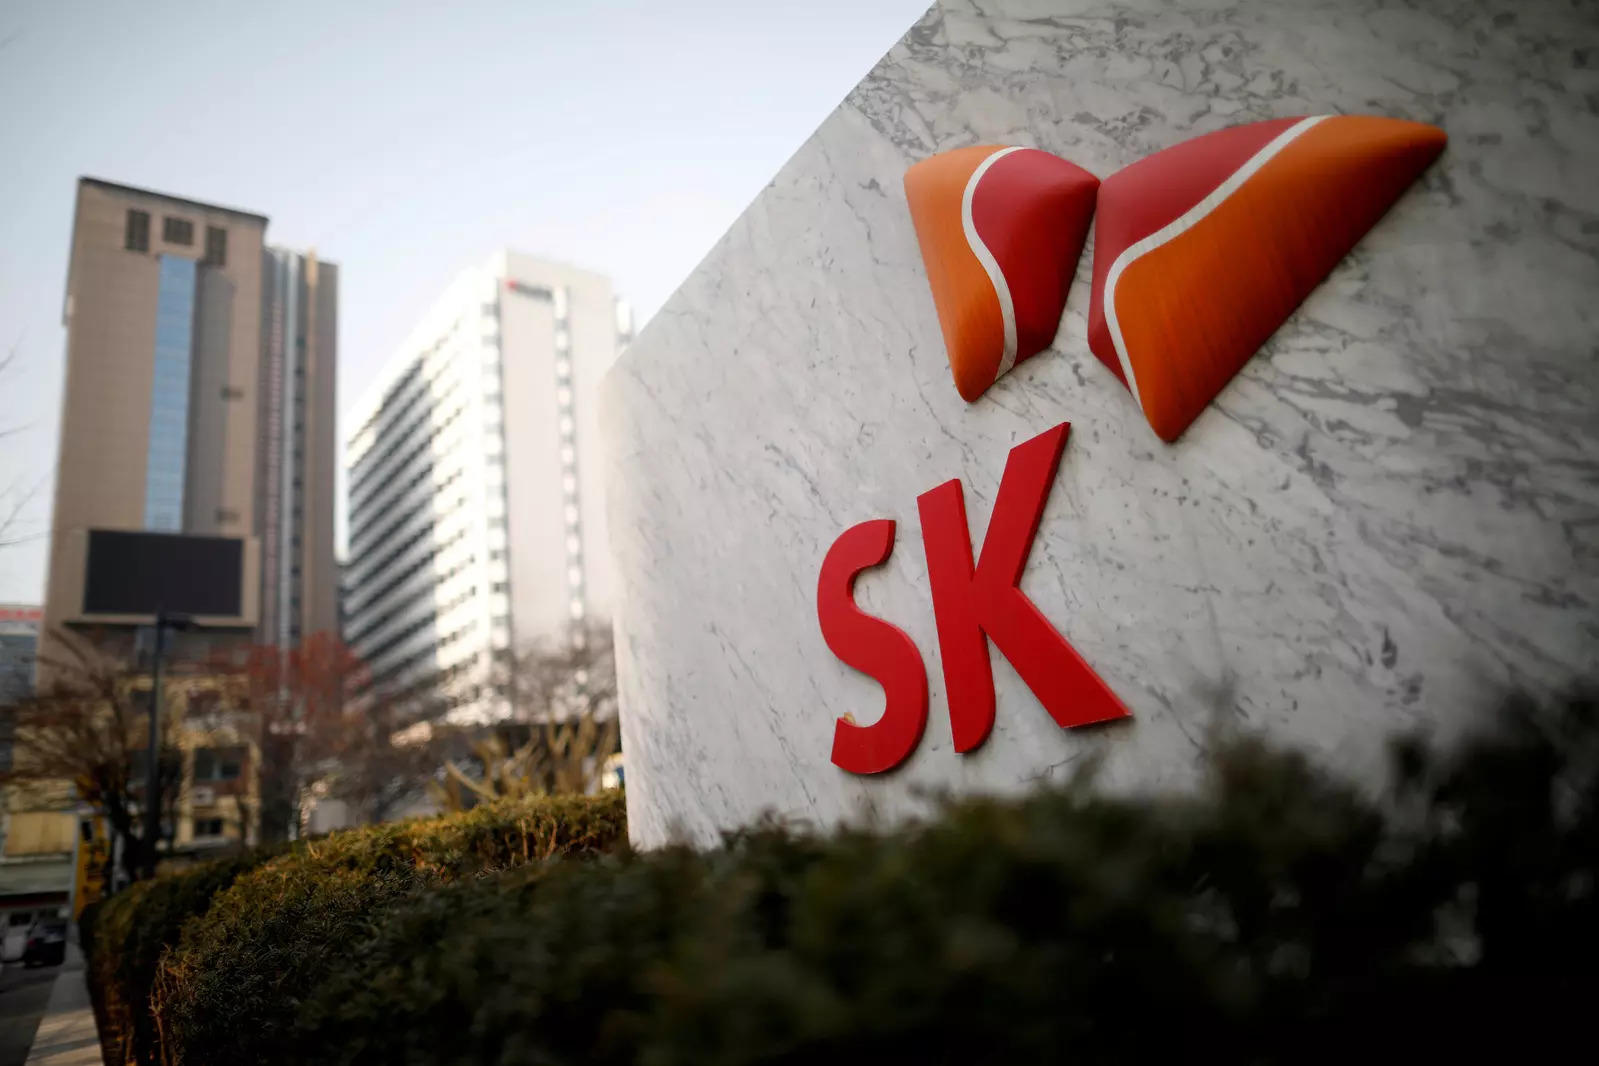 Ev Battery: SK Innovation battery unit SK On aims to raise up to ...